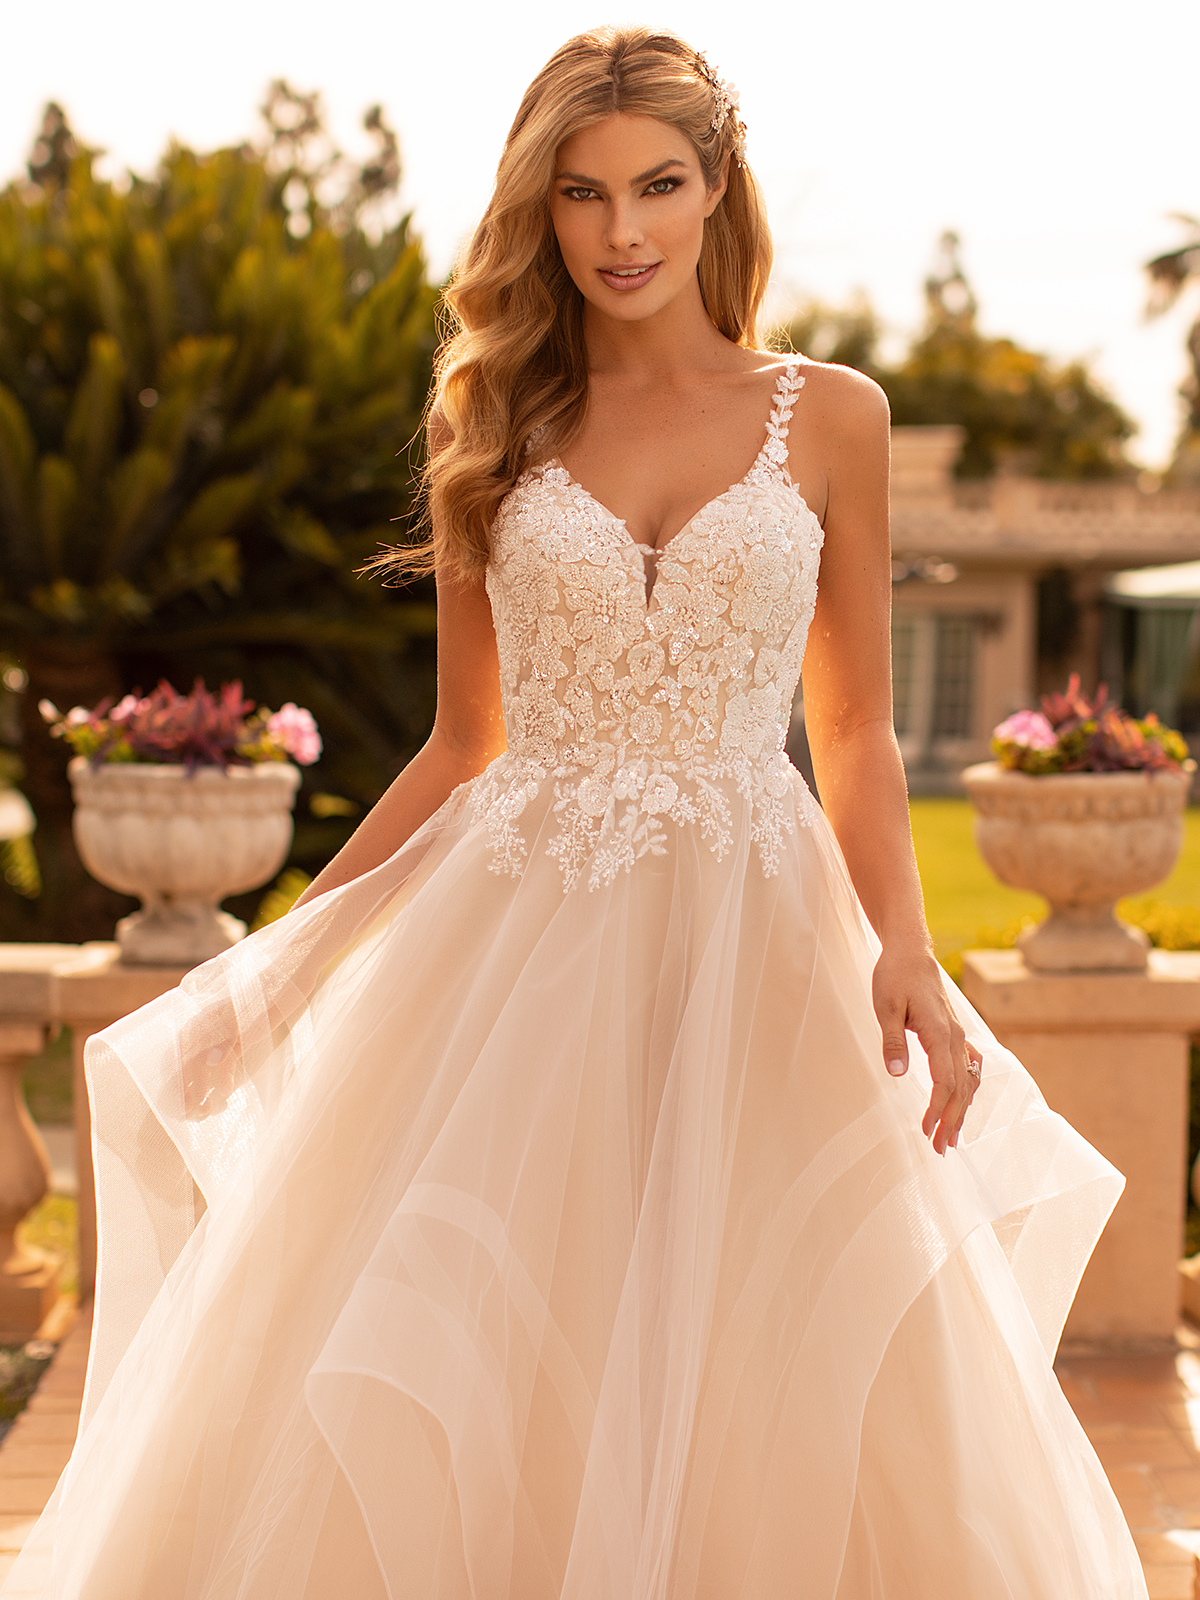 Details about   Wedding Dresses Bridal Sleeveless Shine Skirt Crystal Beads Laces Tulle Sequined 